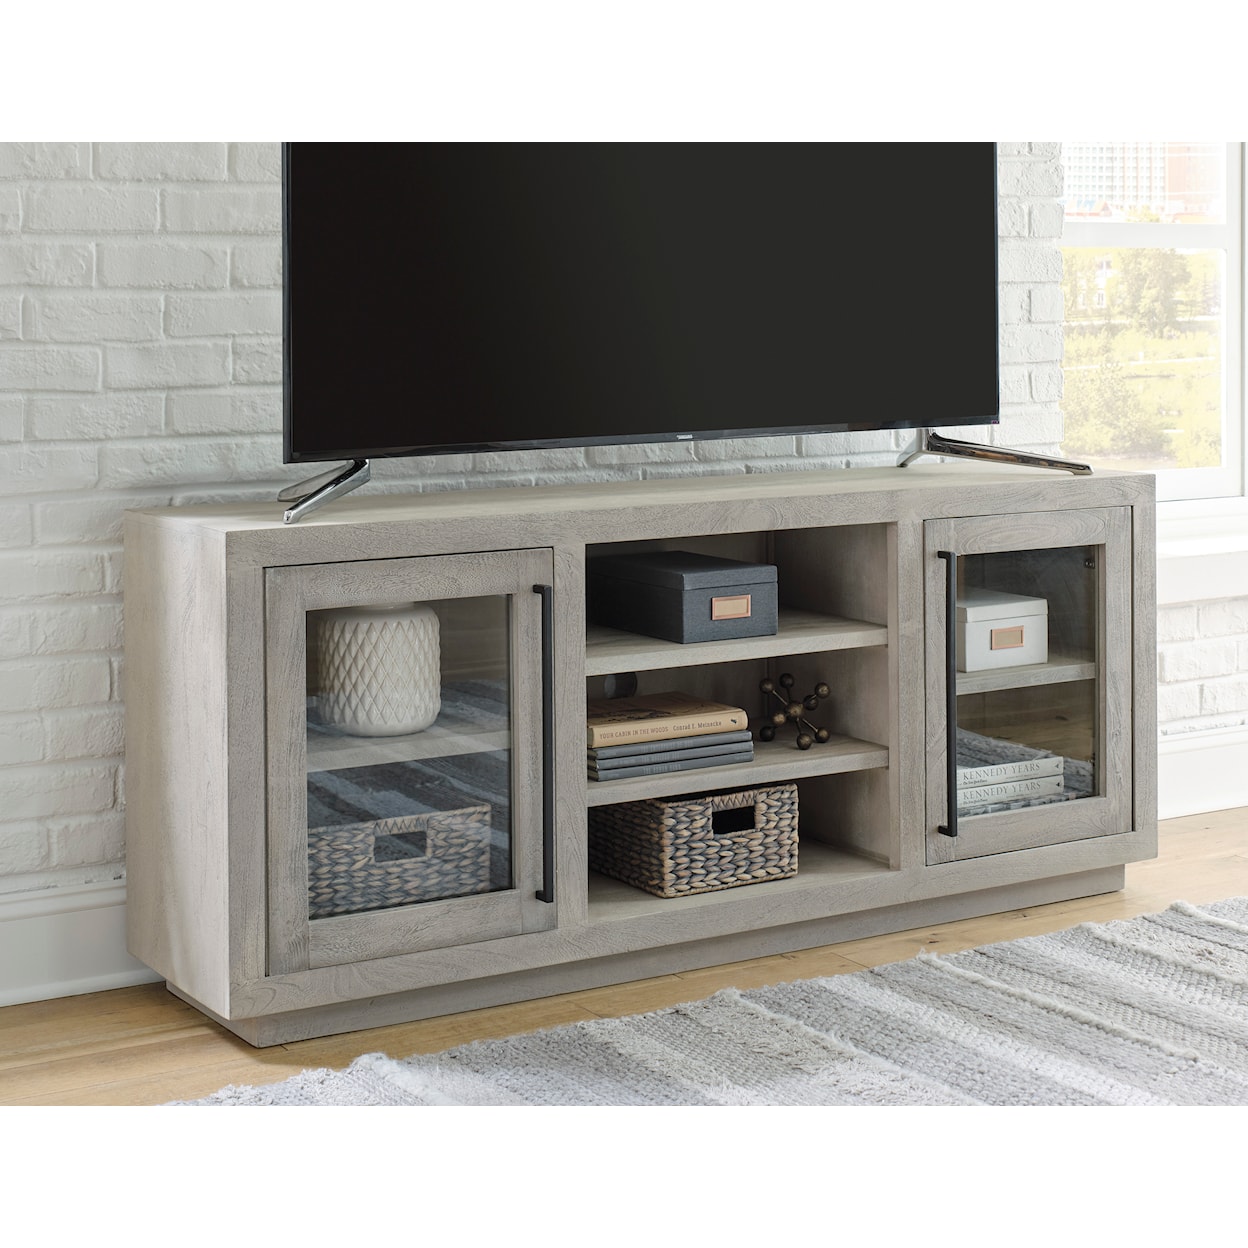 Signature Design by Ashley Saulter Accent Cabinet